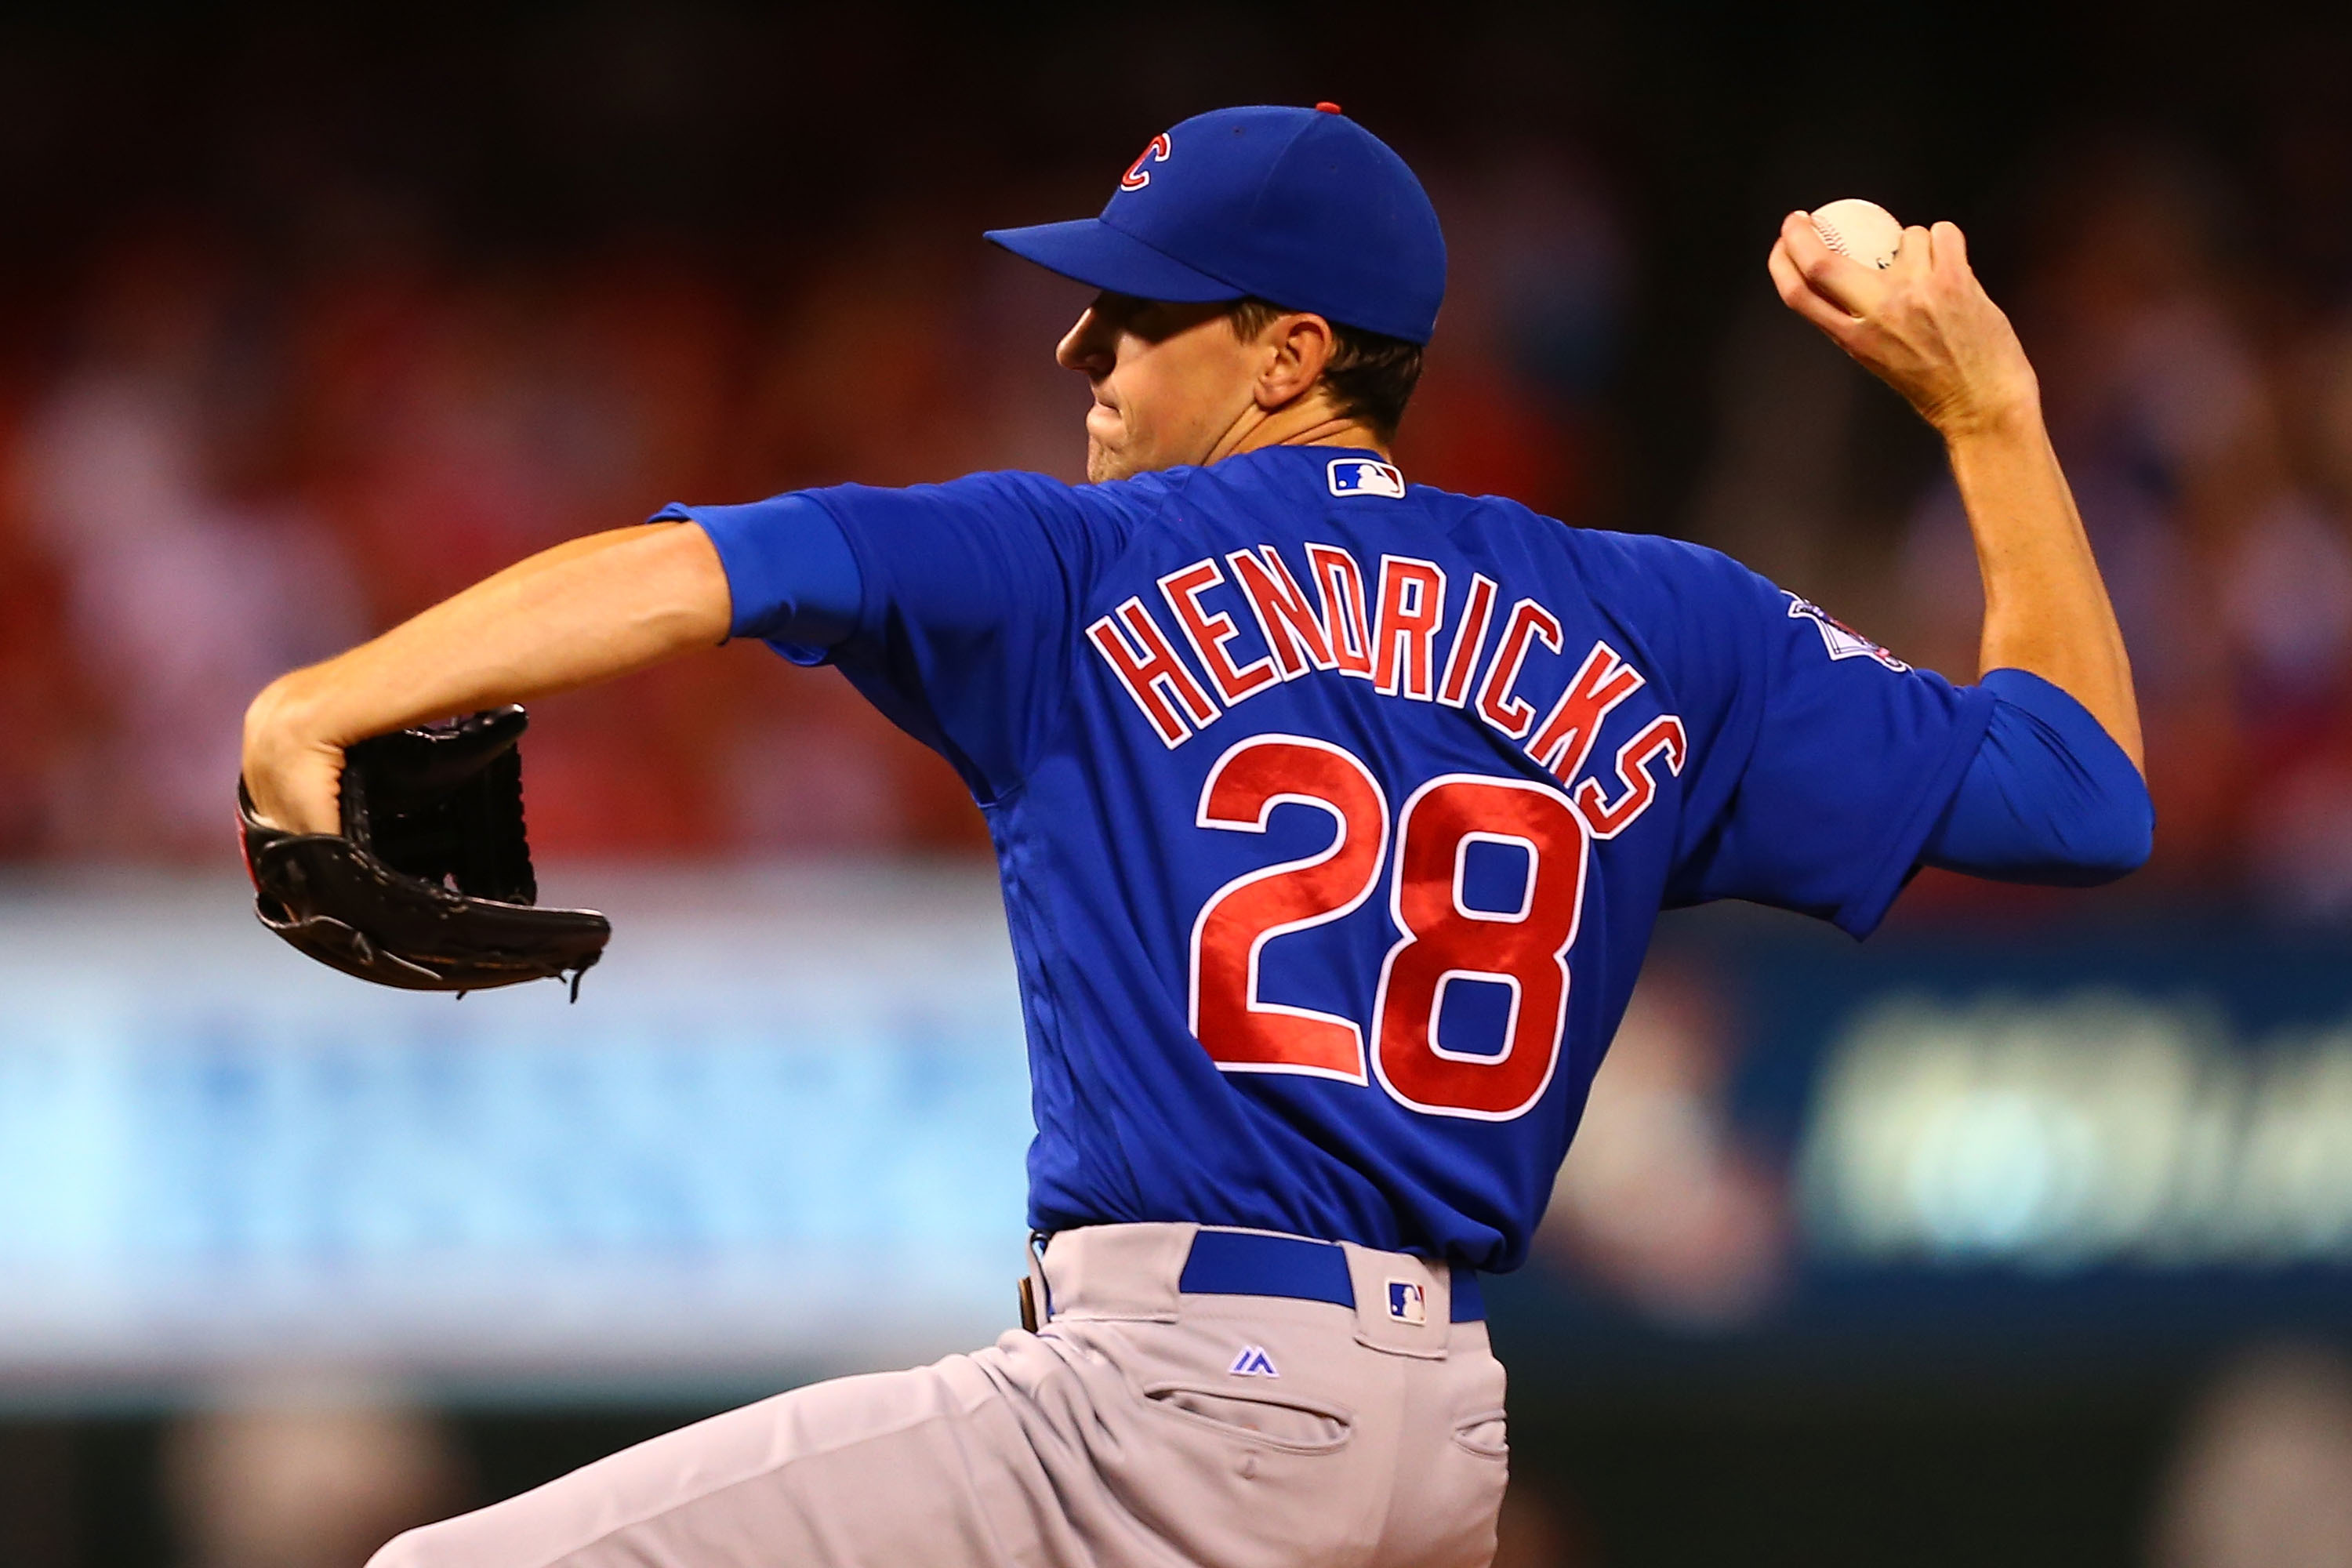 Cubs' Kyle Hendricks shines in his last Wrigley Field start before